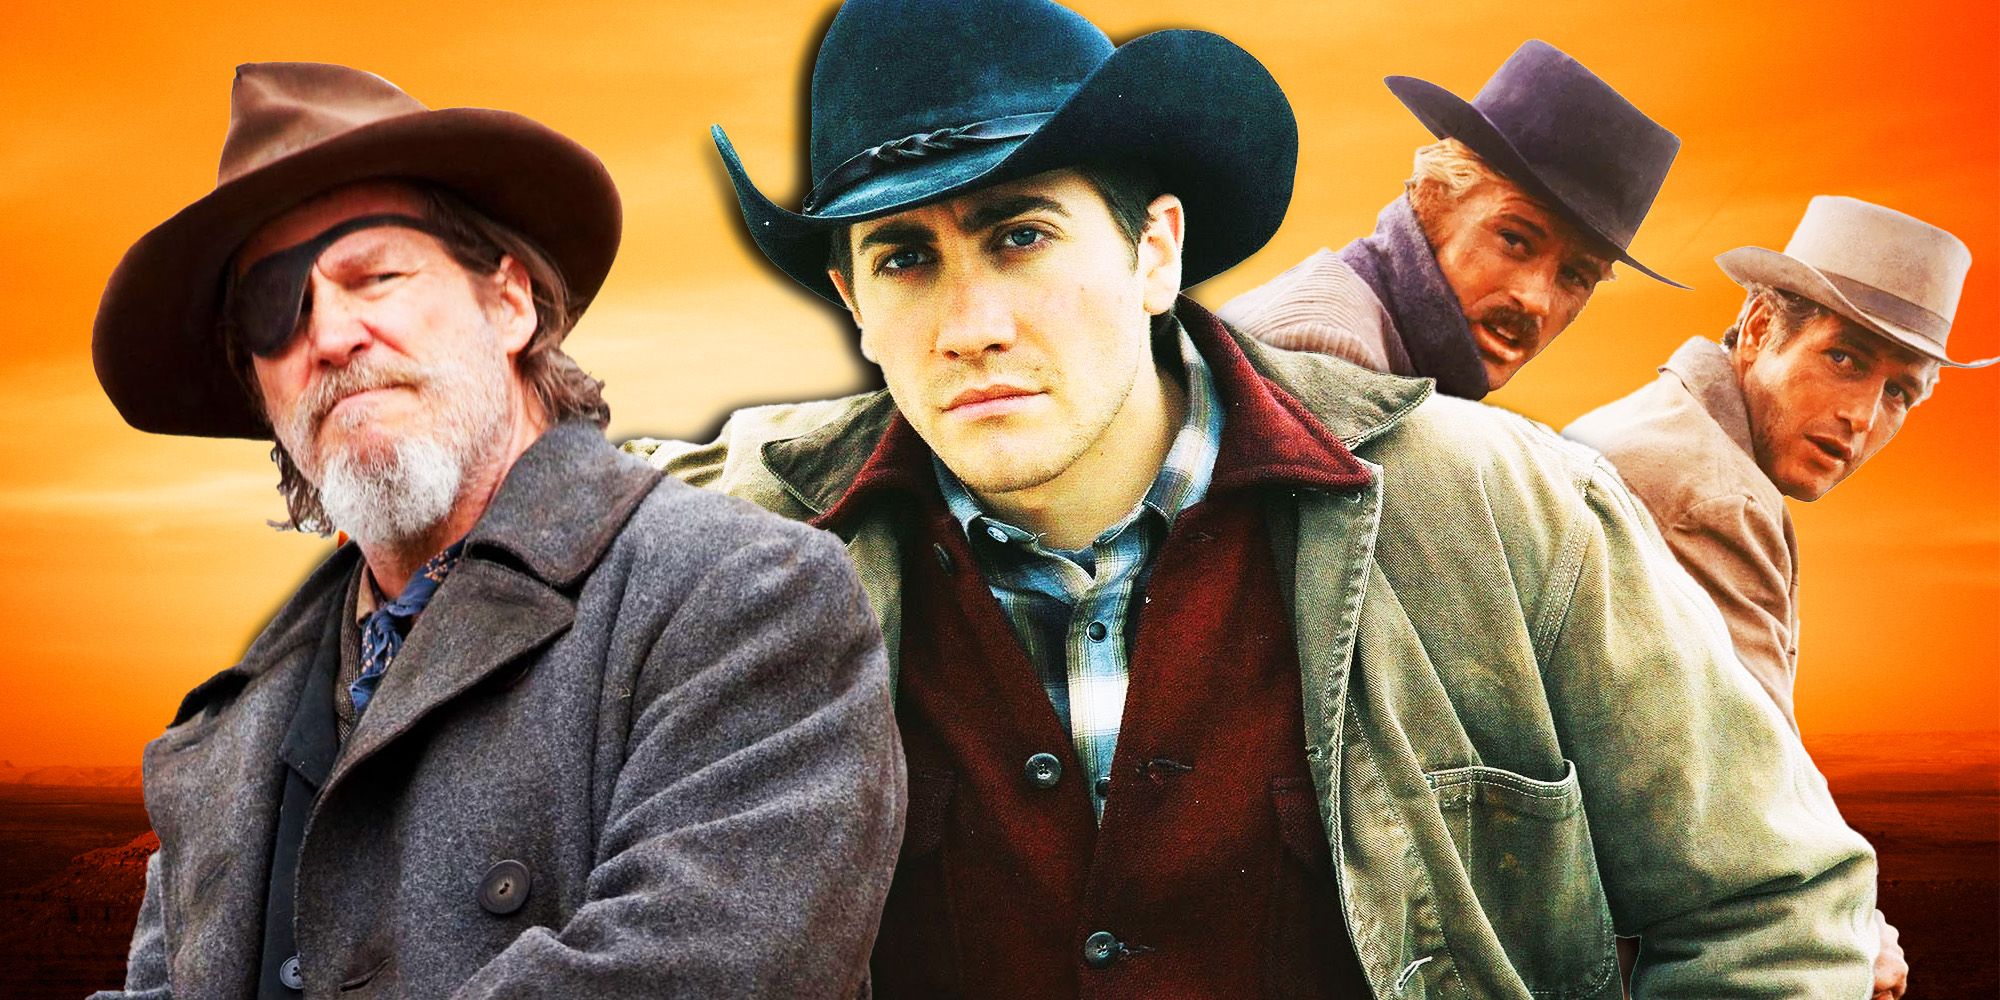 Brokeback Mountain, True Grit, and Butch Cassidy and the Sundance Kid